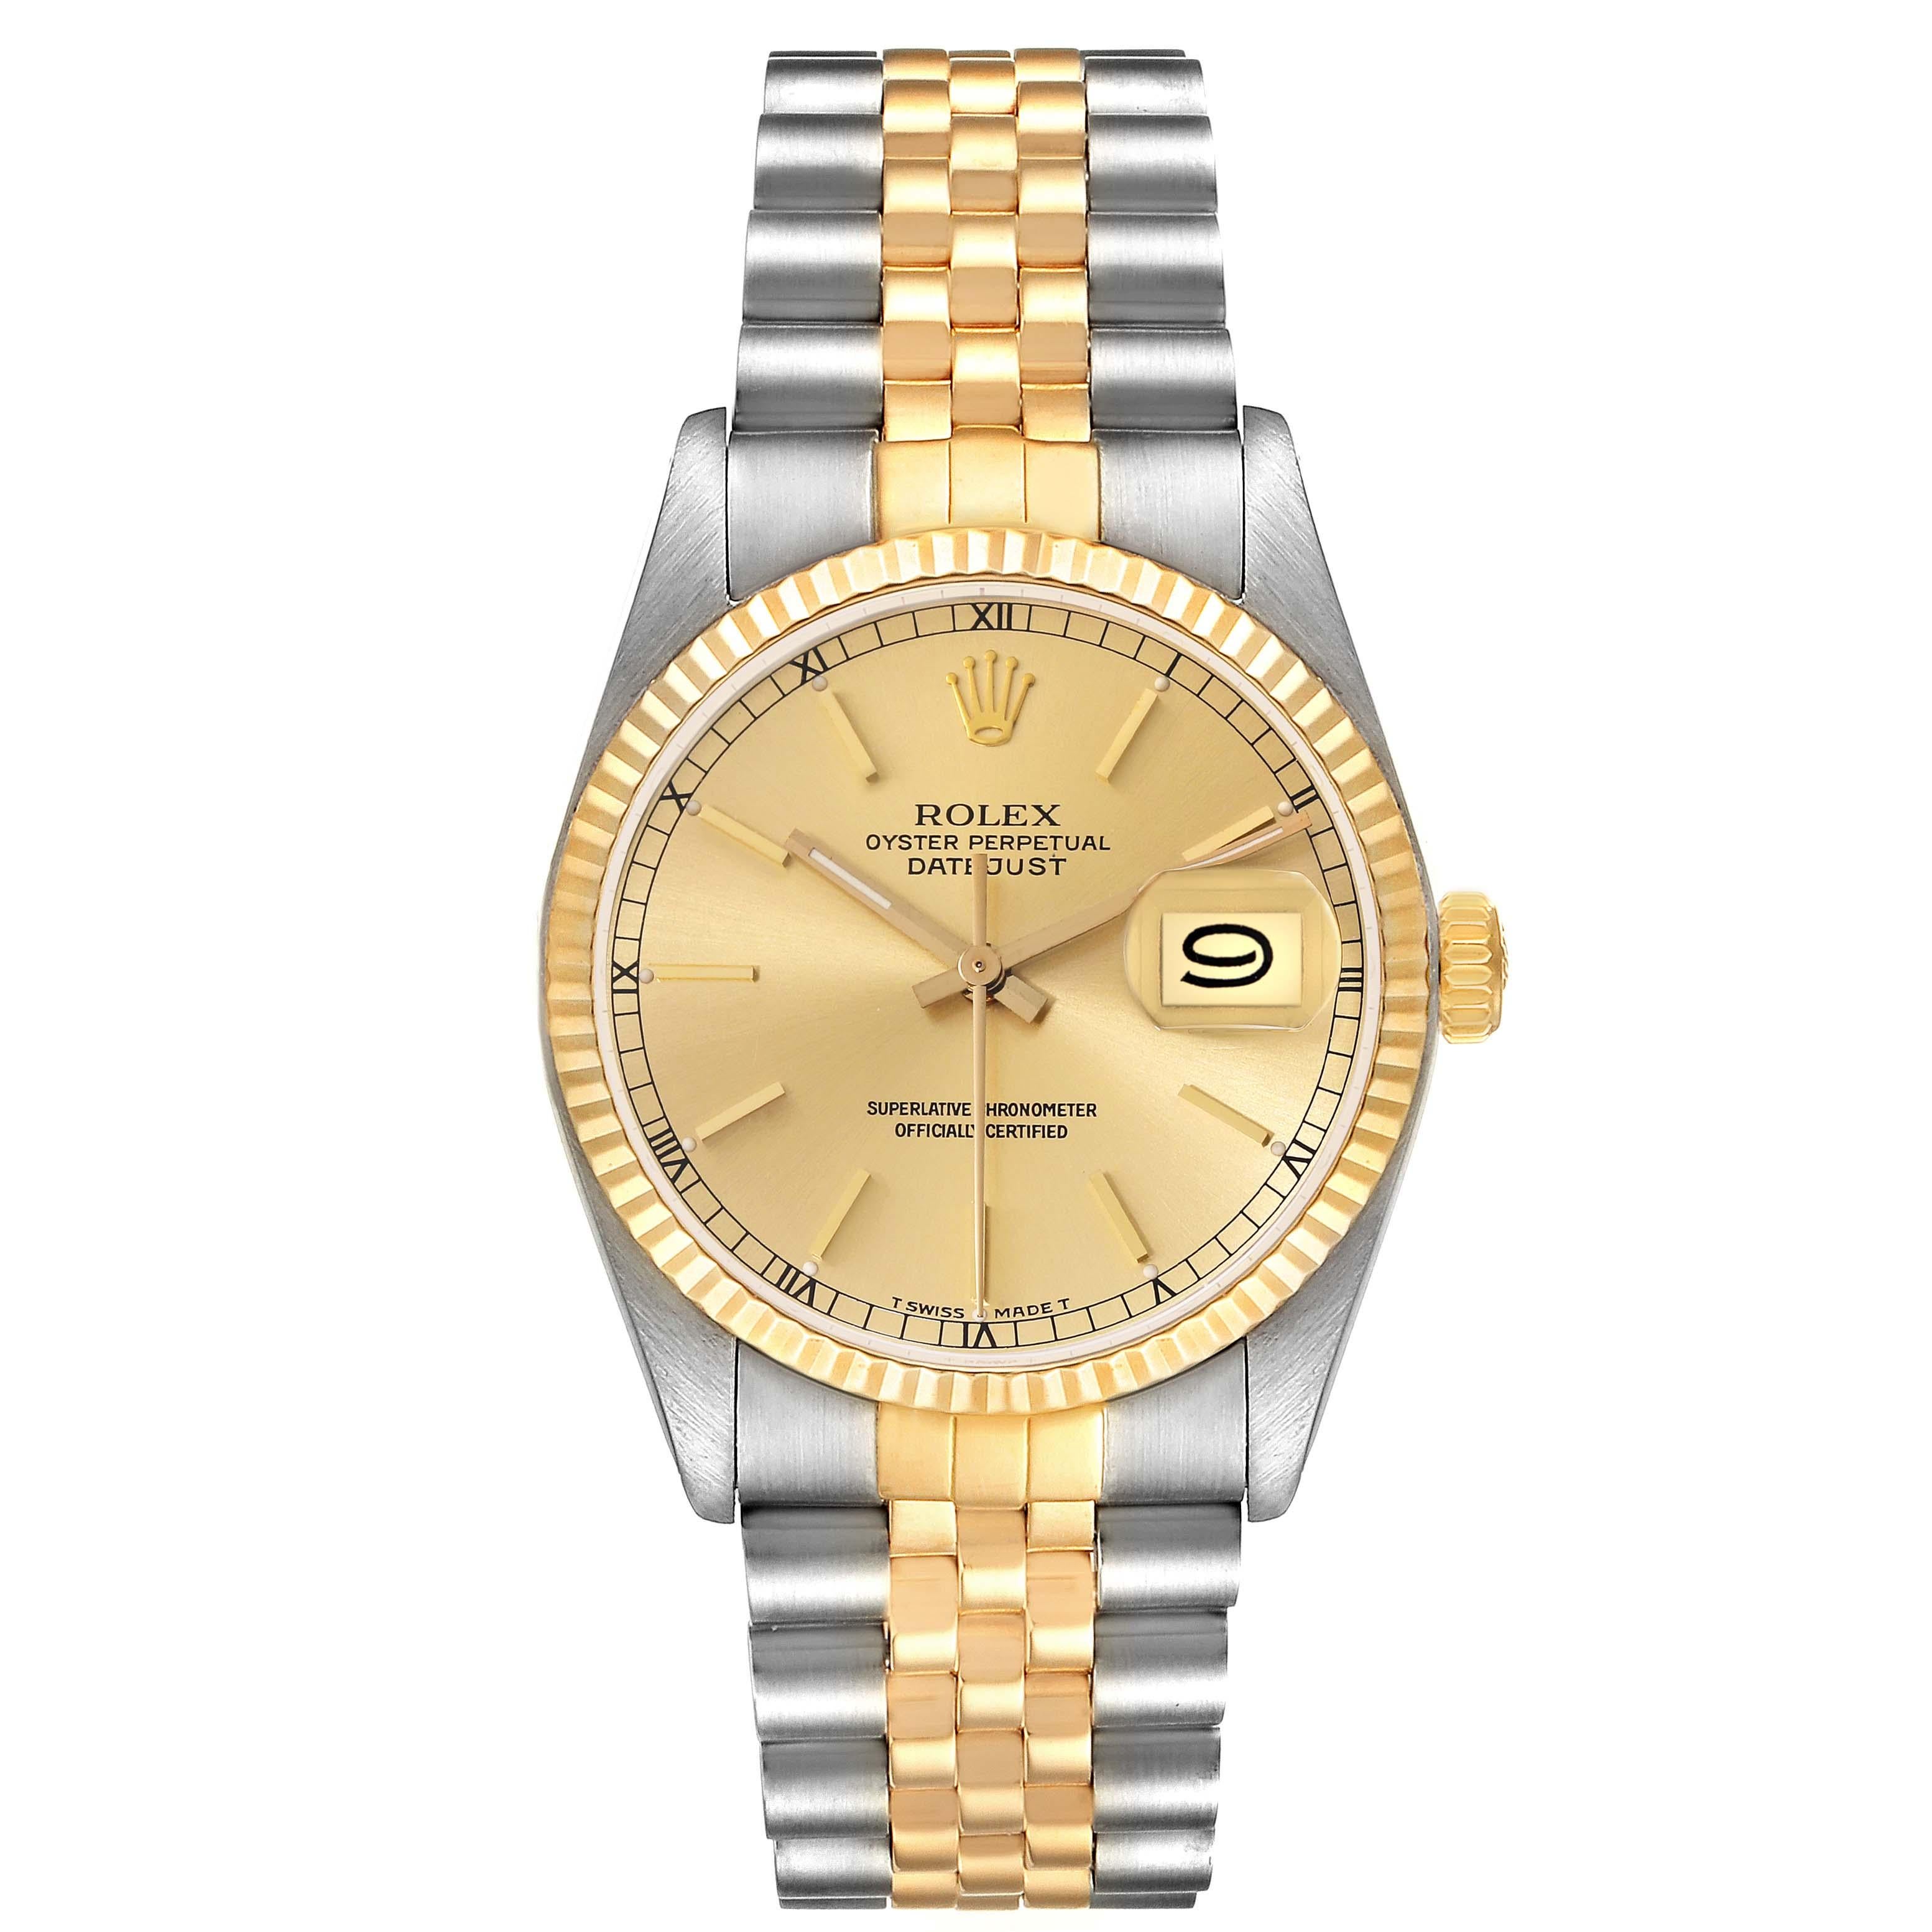 Rolex Datejust Steel Yellow Gold Vintage Mens Watch 16013 Box Card. Officially certified chronometer automatic self-winding movement. Stainless steel and 18k yellow gold oyster case 36.0 mm in diameter. Rolex logo on an 18k yellow gold crown. 18k